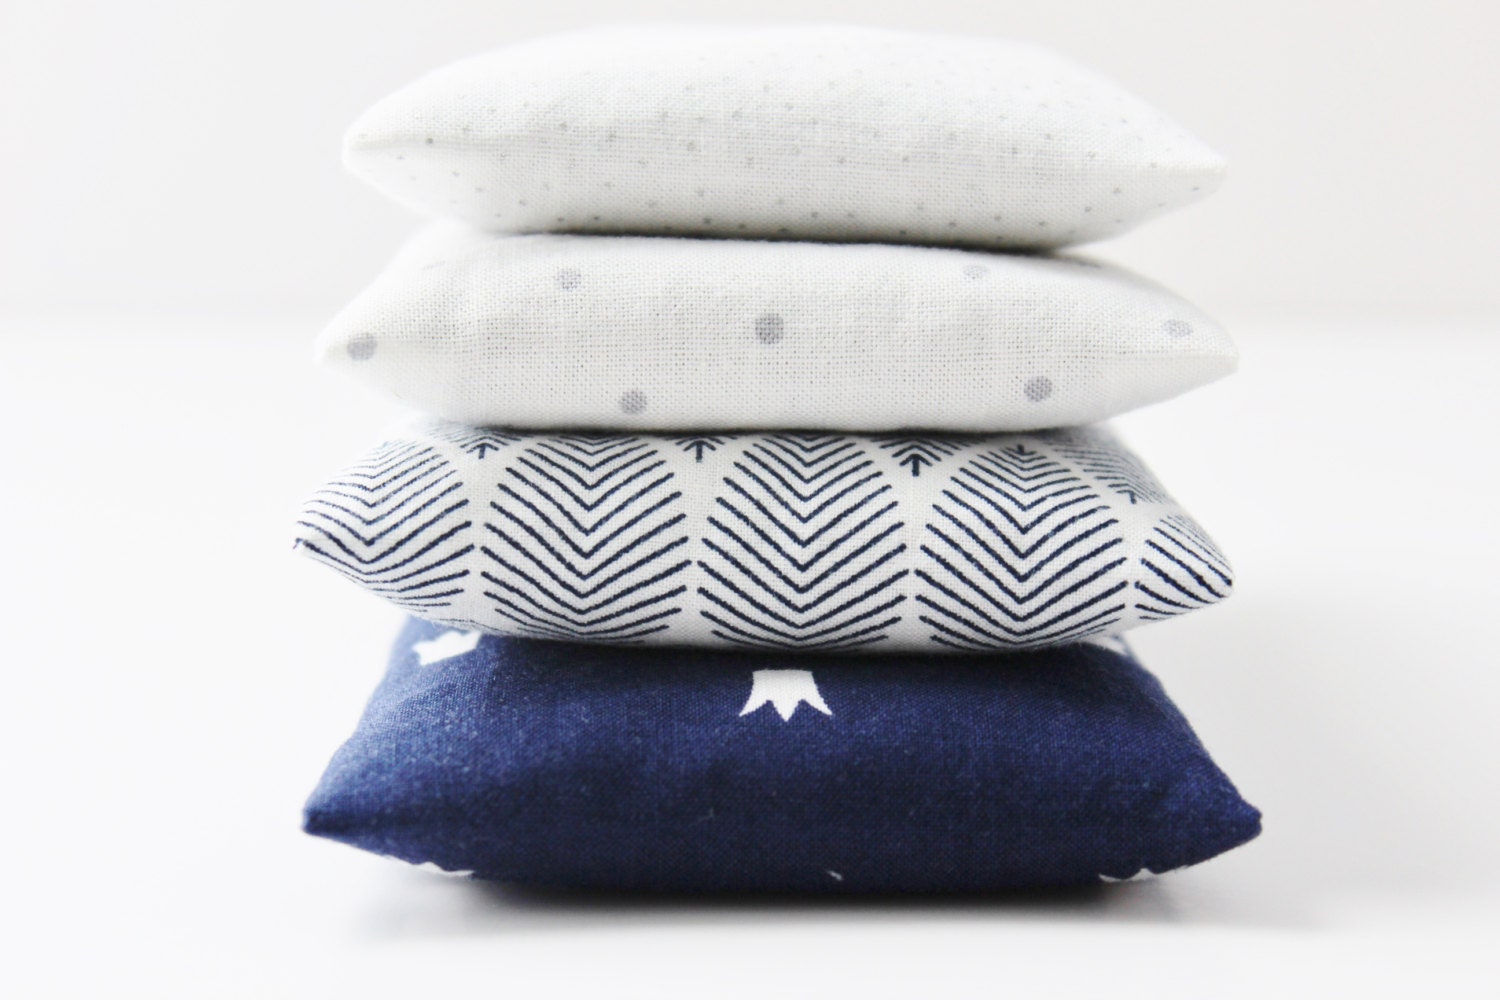 Set of 4 Modern Lavender Bags, Scented Drawer Sachets, White Grey & Navy - Gardenmis